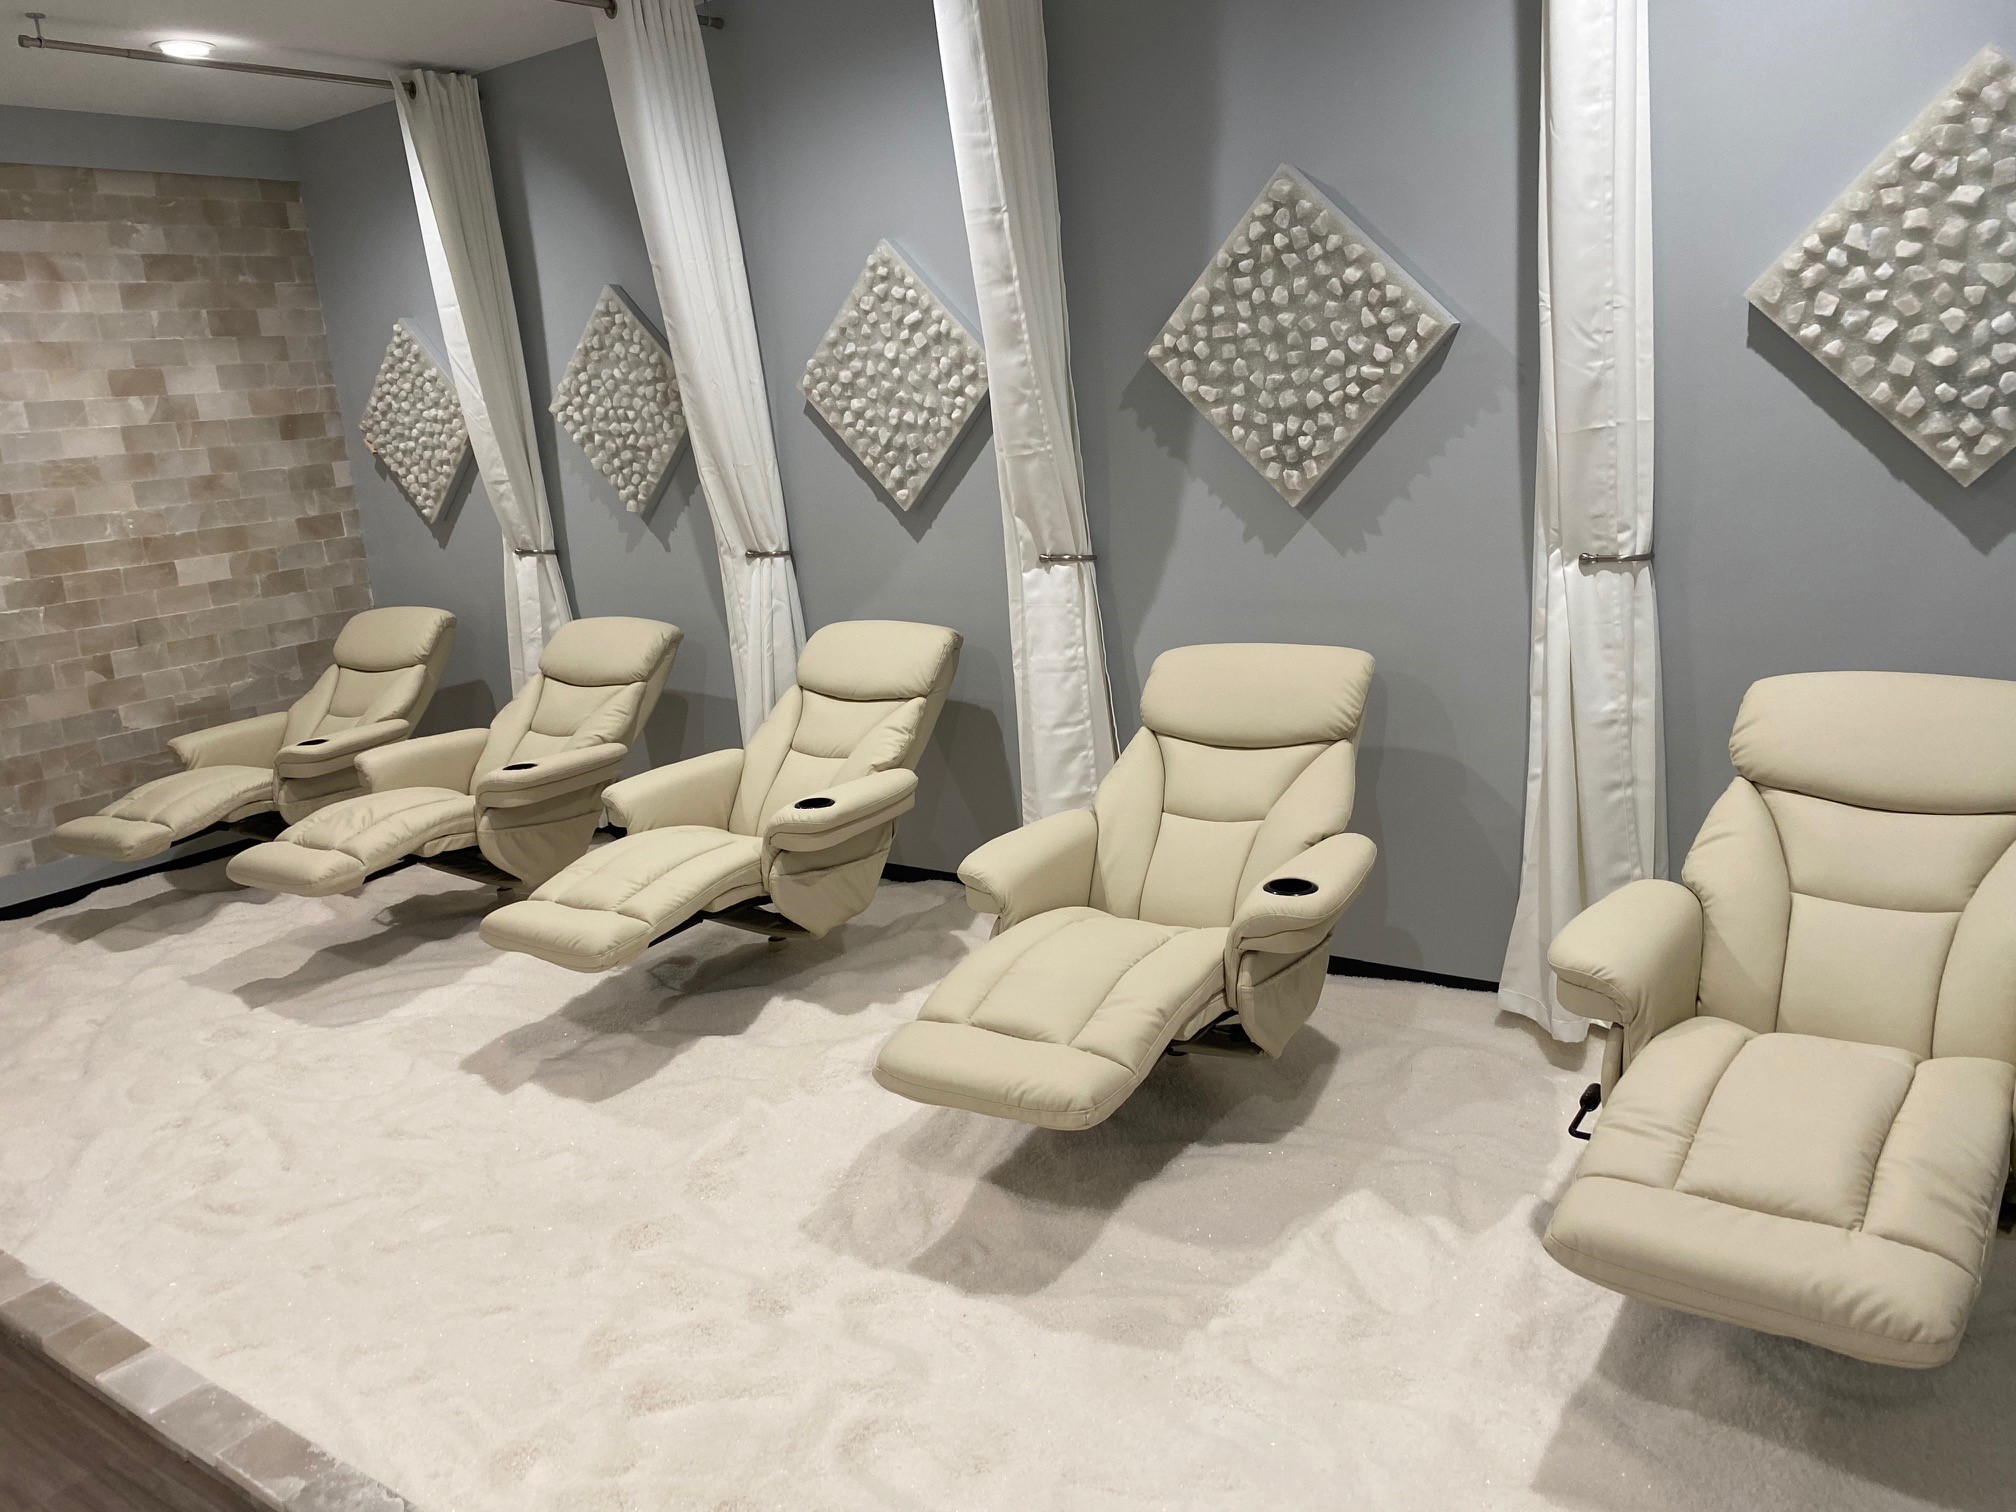 Five White Cushioned Lounge Chairs On A Bed Of White Salt With Five White Diamond Salt Panel Décors Above Them.